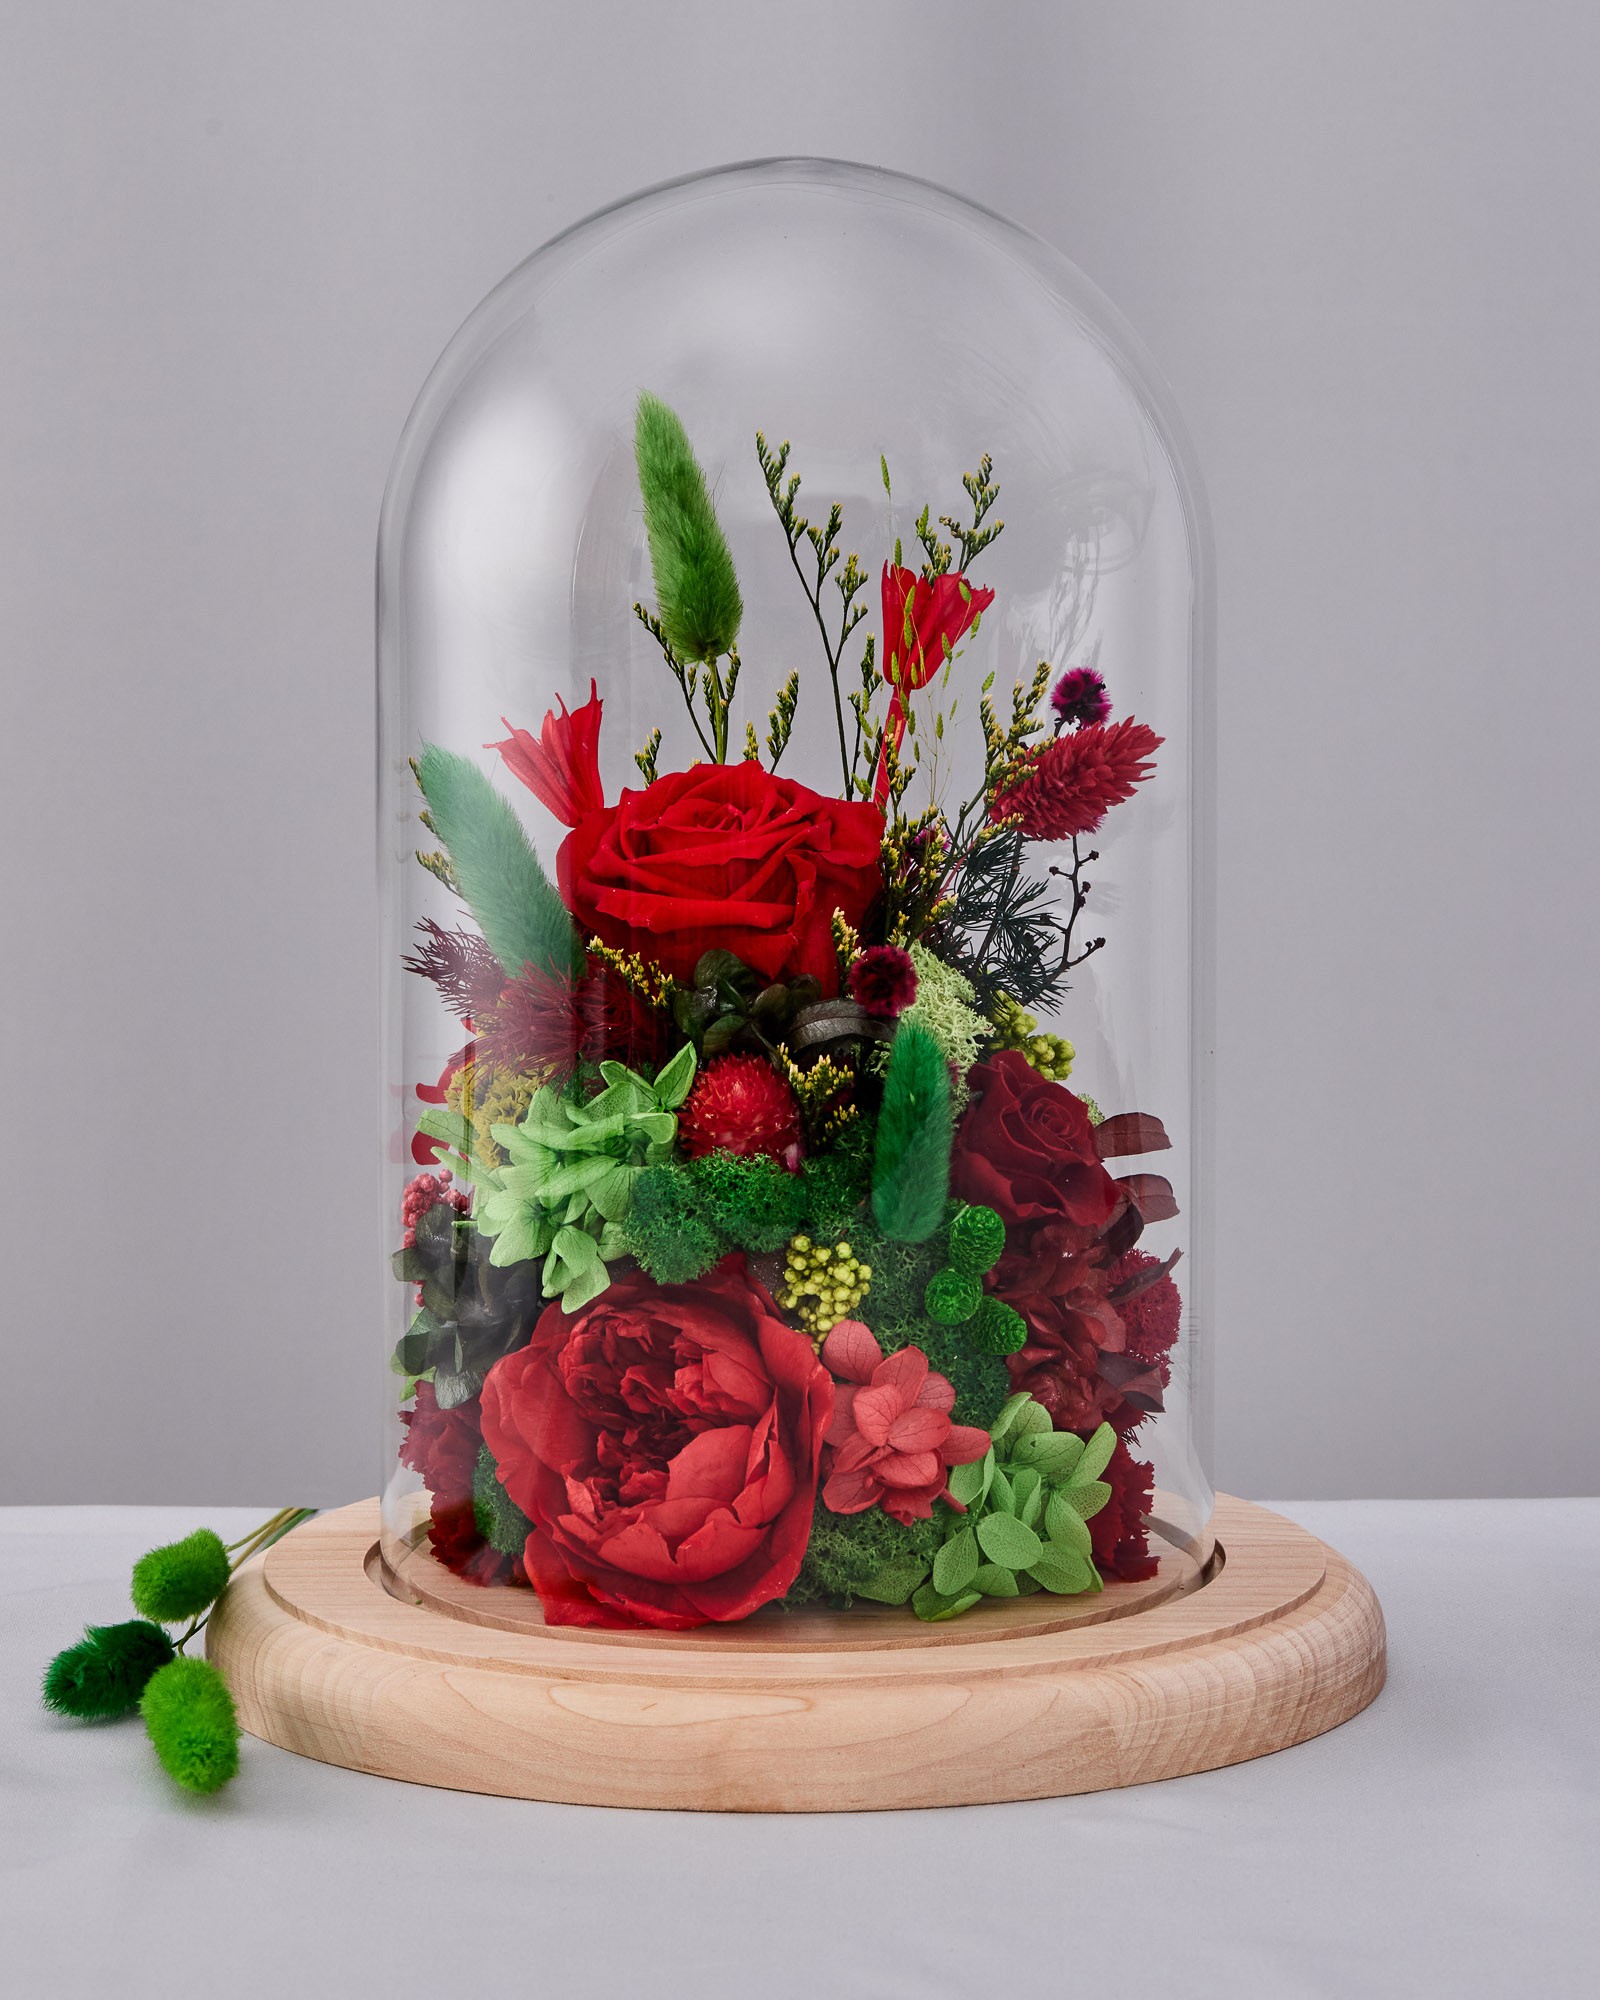 Flowers in glass dome "At the peak of feelings"